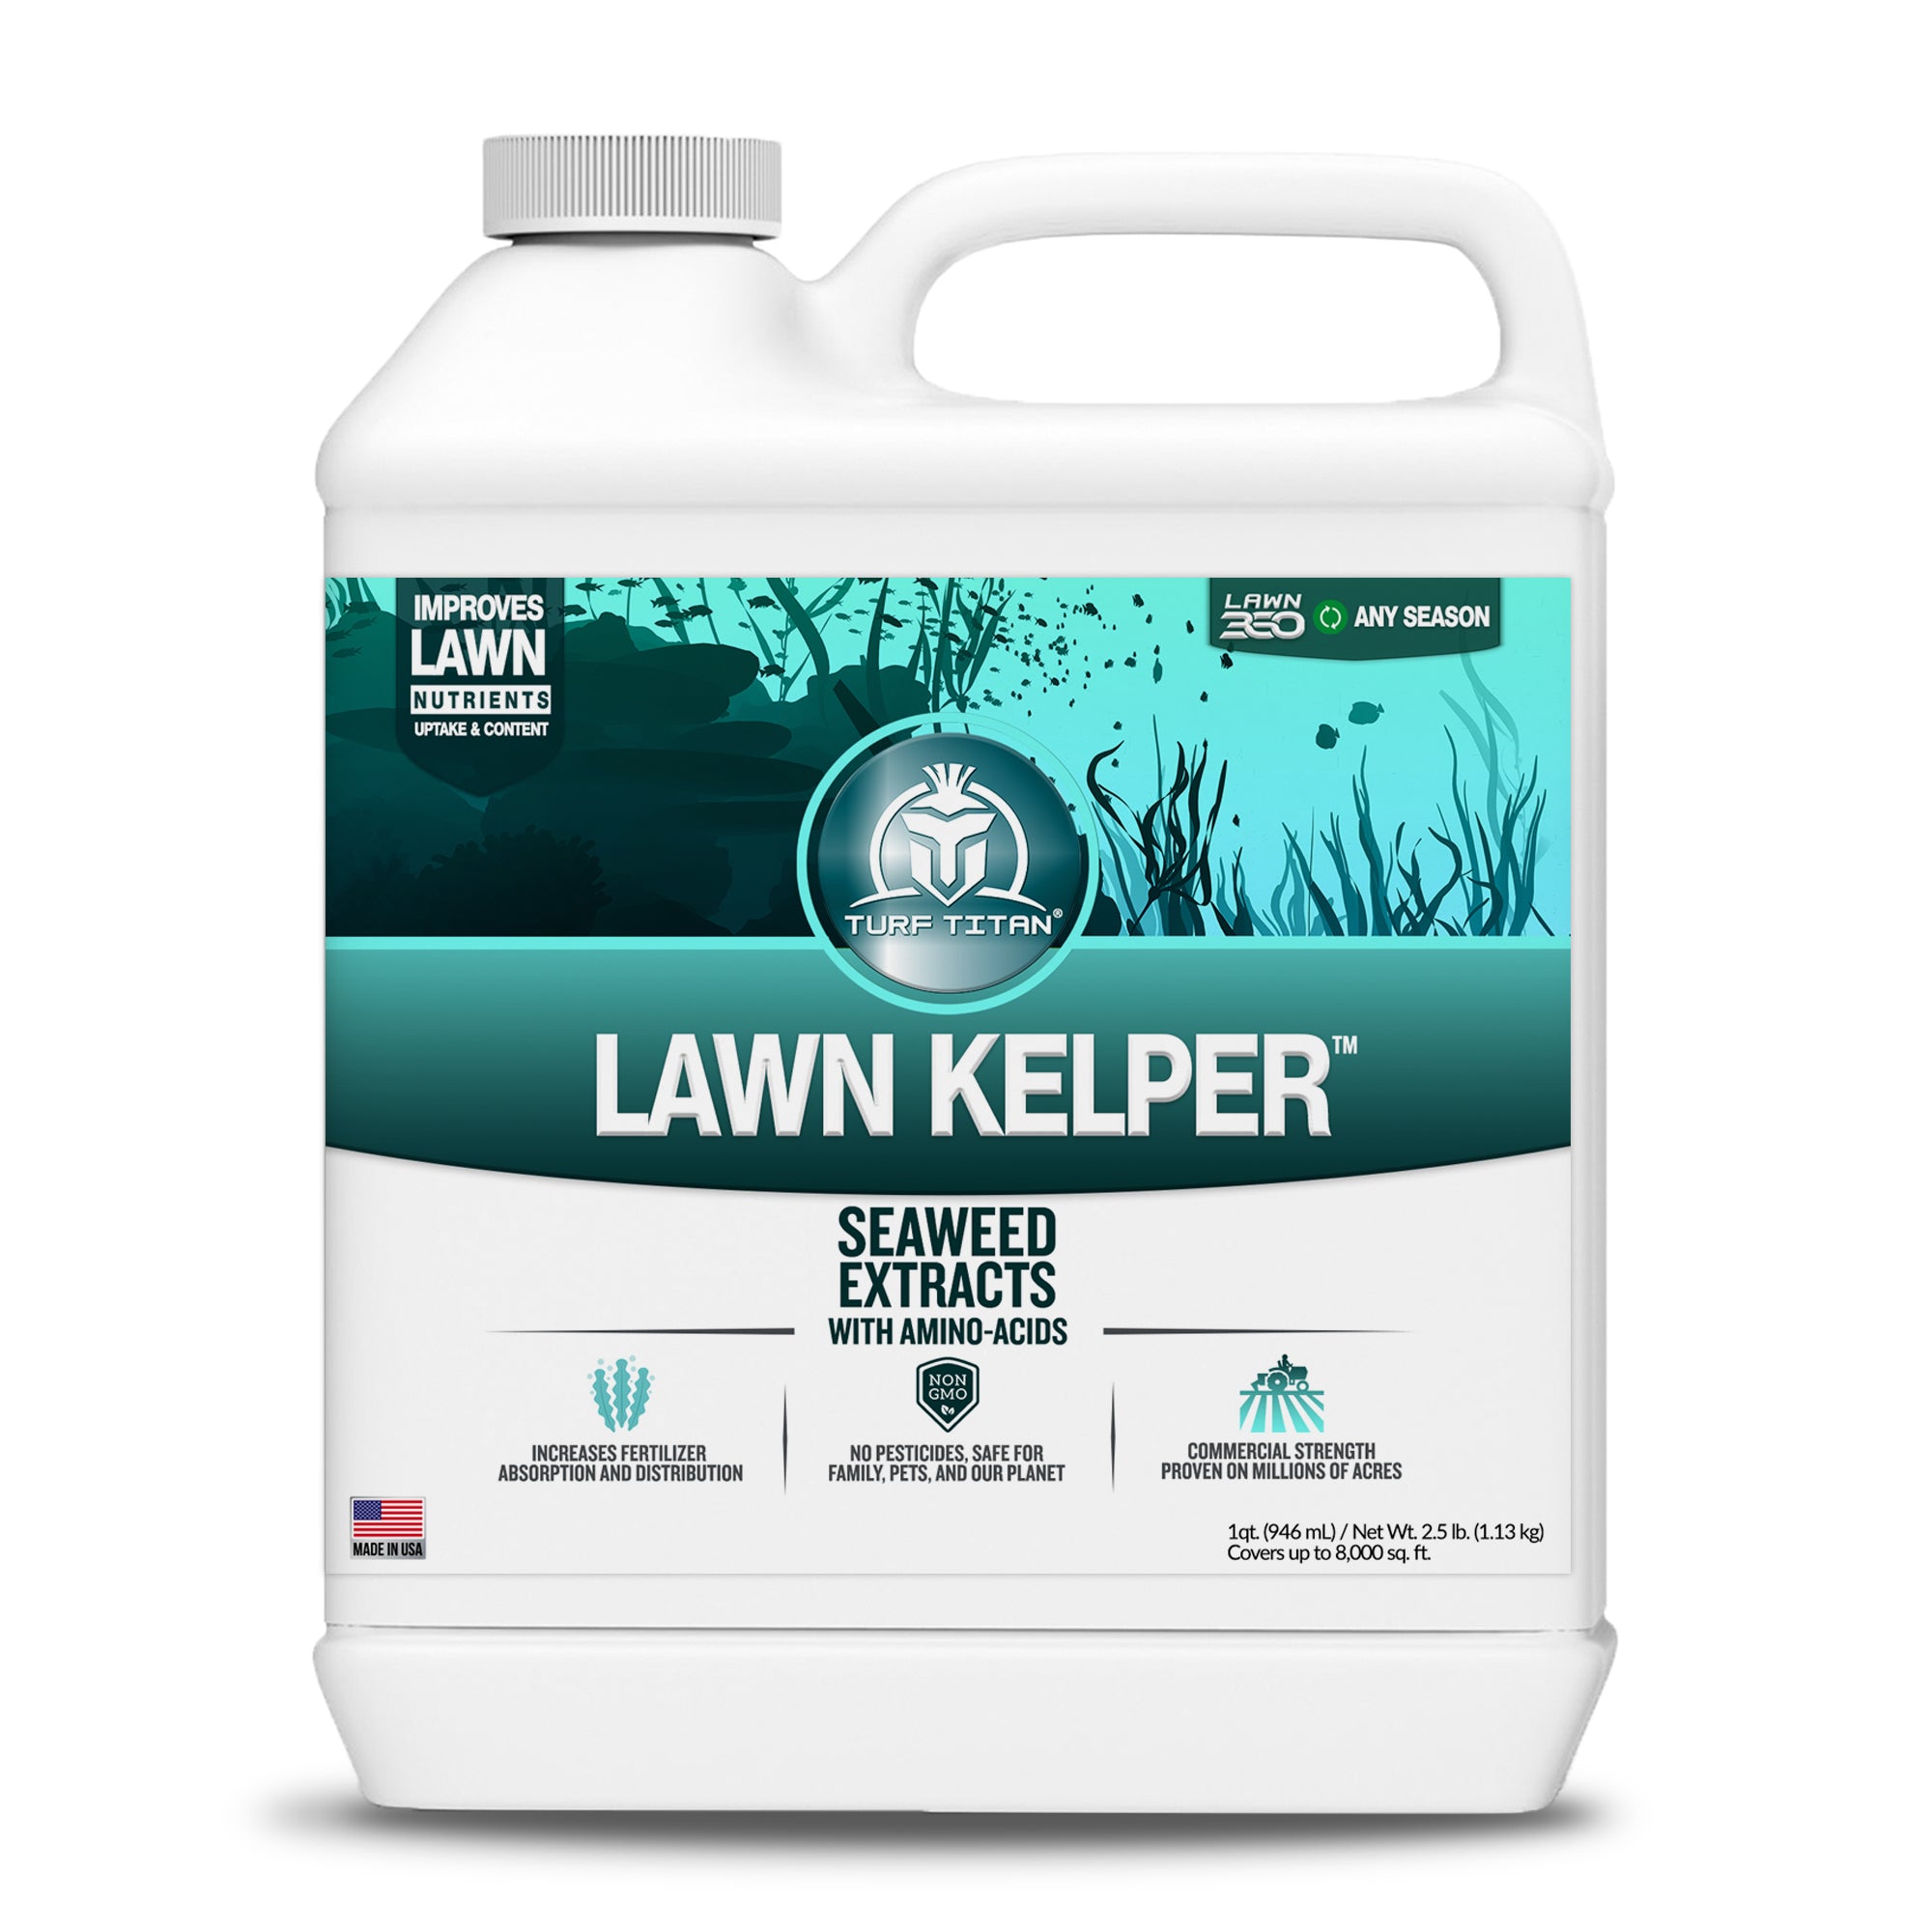 Lawn Roller: What it is and When to use one - NG Turf